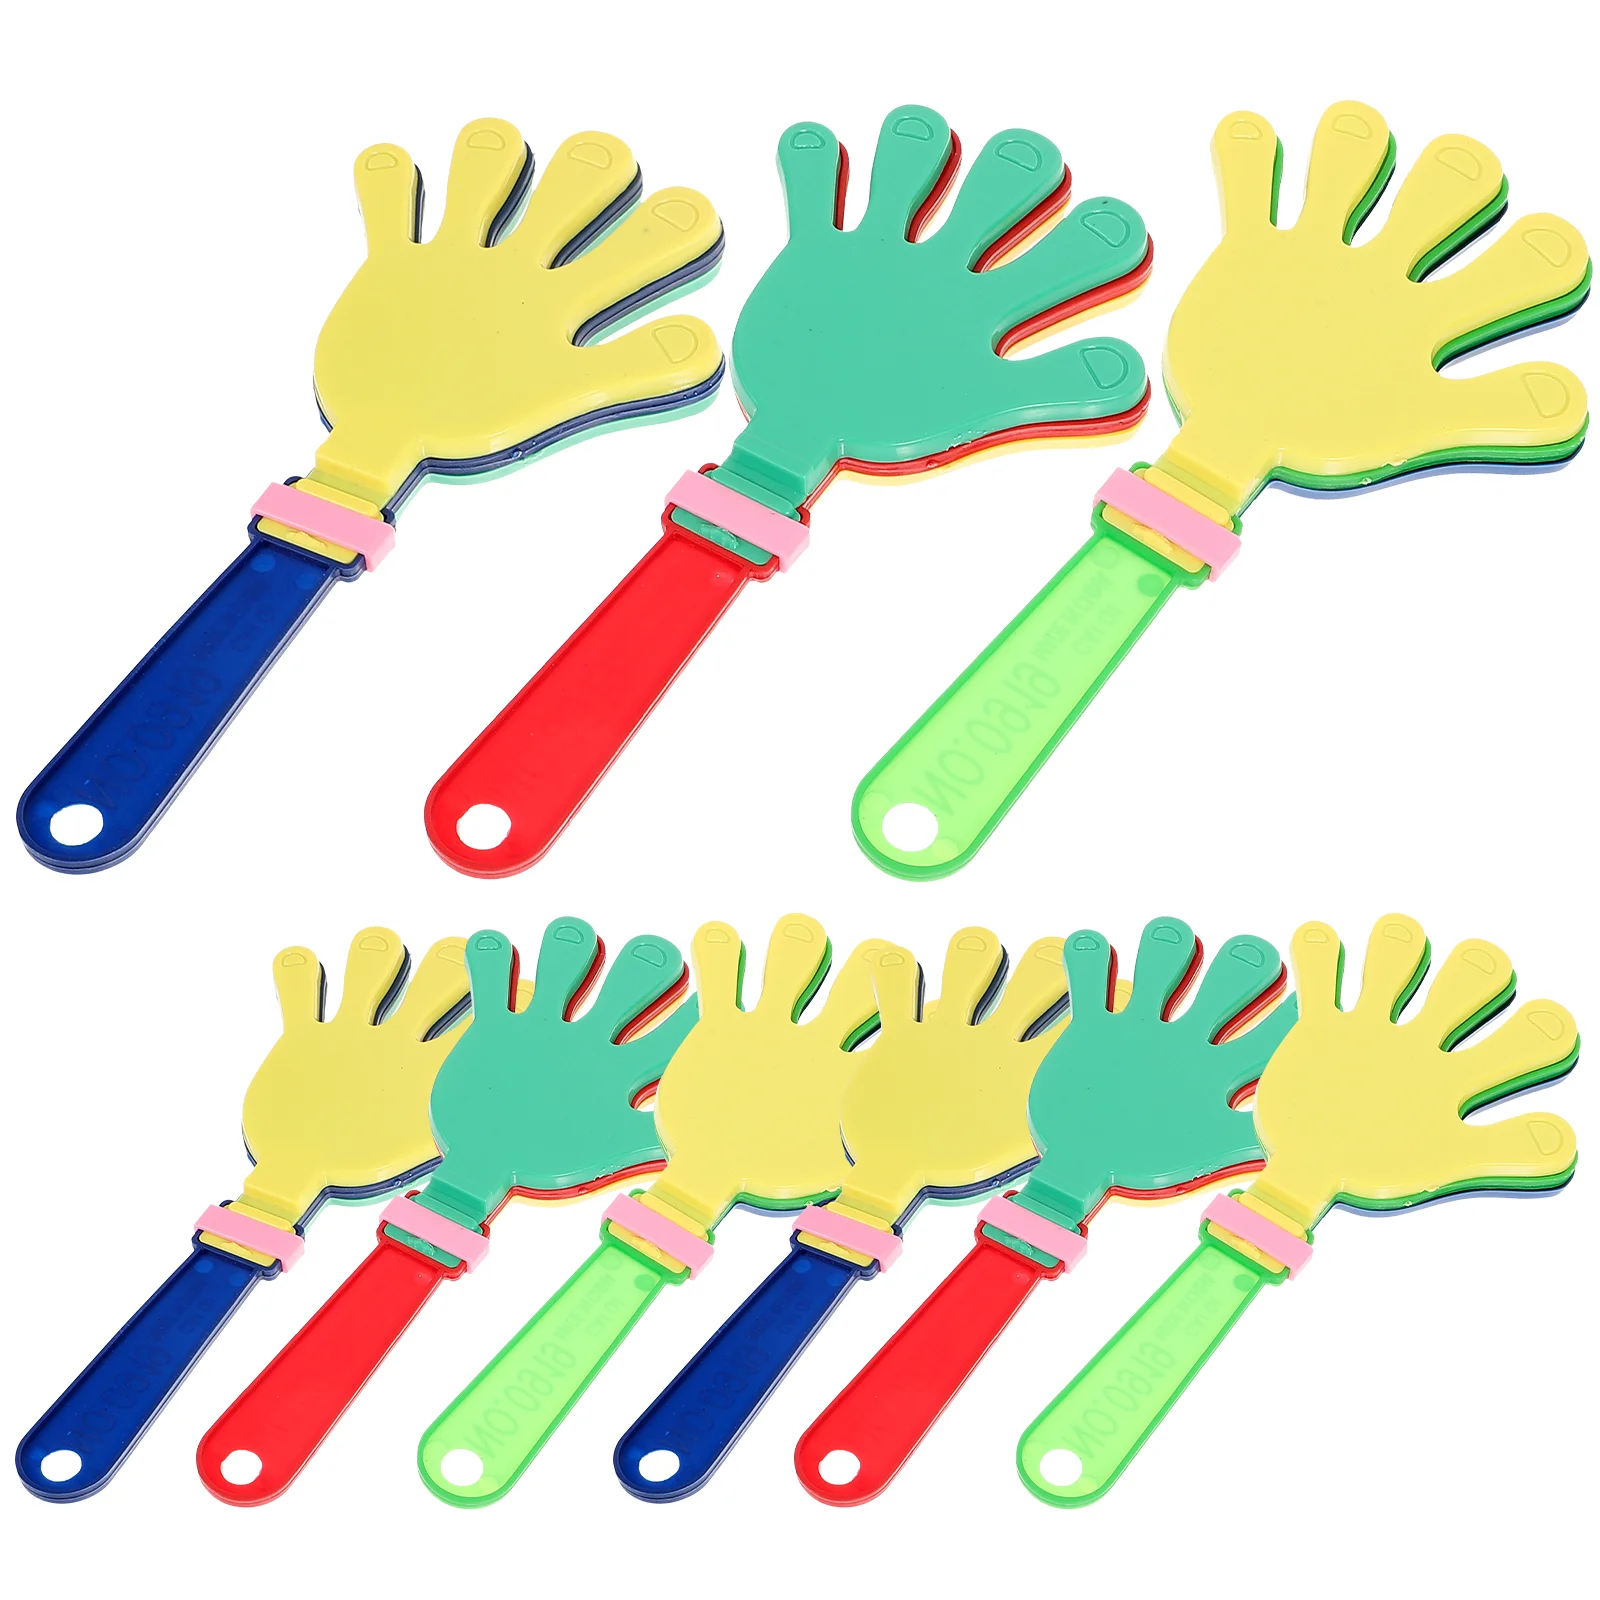 

Hand Clappers Hands Clapping Concert Party Cheering Props Noisemaker Toys Party Favors for Children Kids